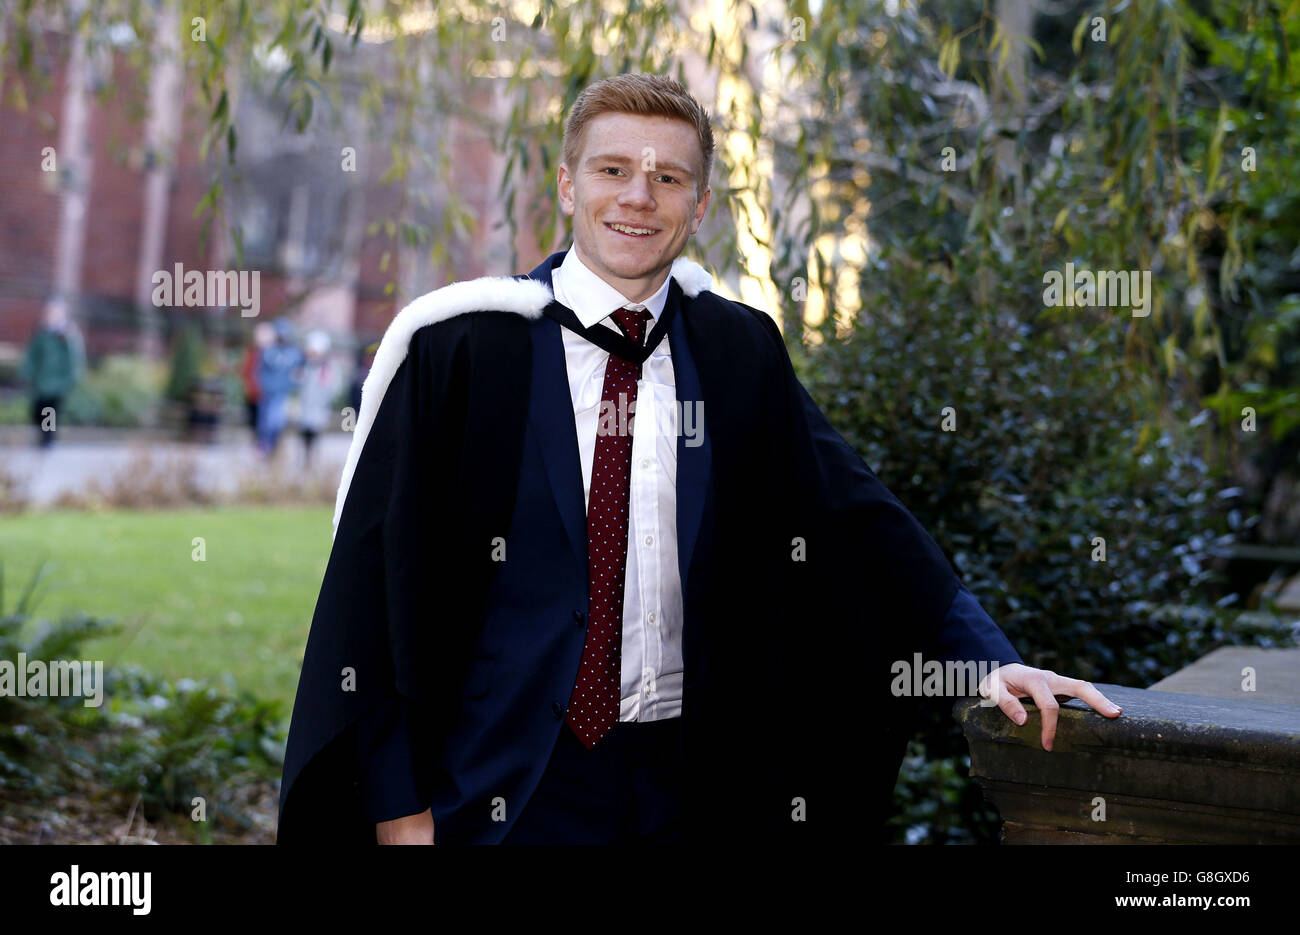 England under 21 and Sunderland forward Duncan Watmore as he graduates with First Class Honours from Newcastle University with a degree in Economics and Business Management. Stock Photo